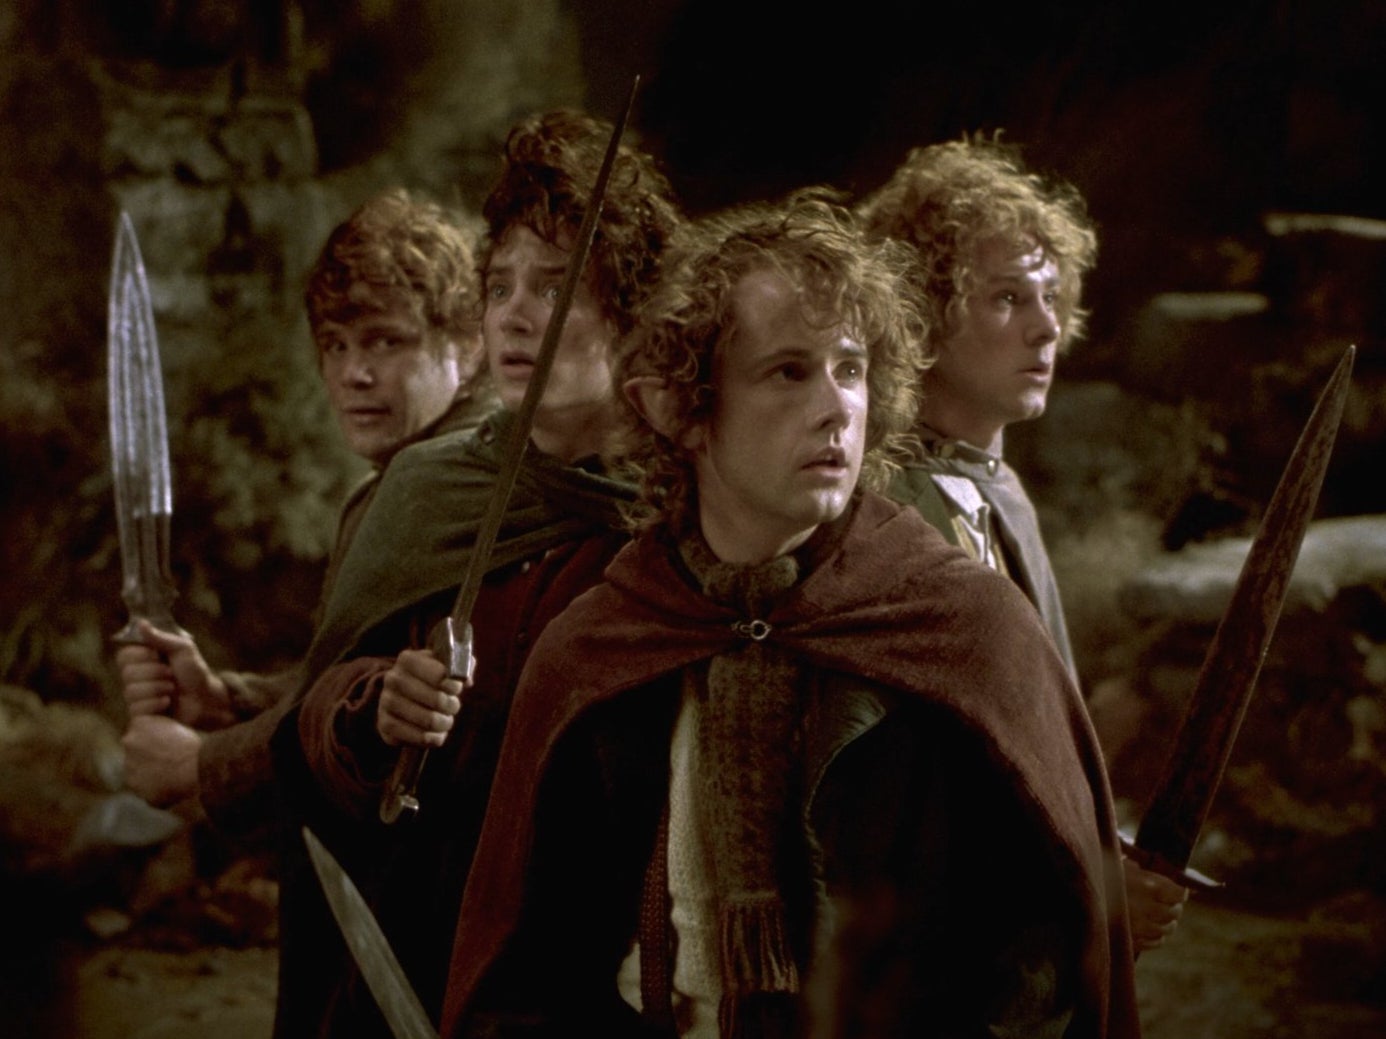 10 Scenes From The Lord Of The Rings Trilogy That Get Better Over Time